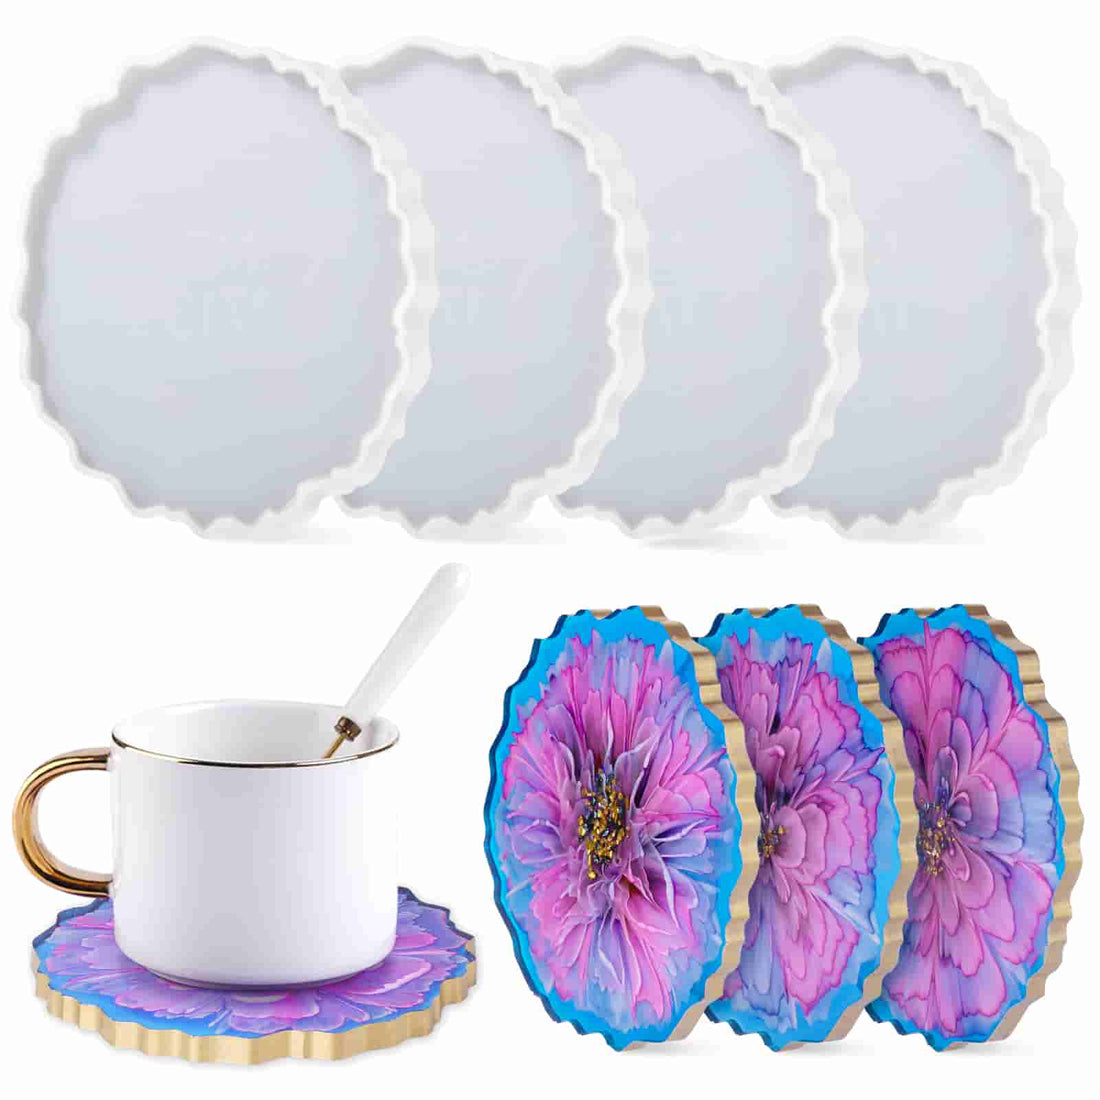 Coaster&Tray Molds – Let's Resin